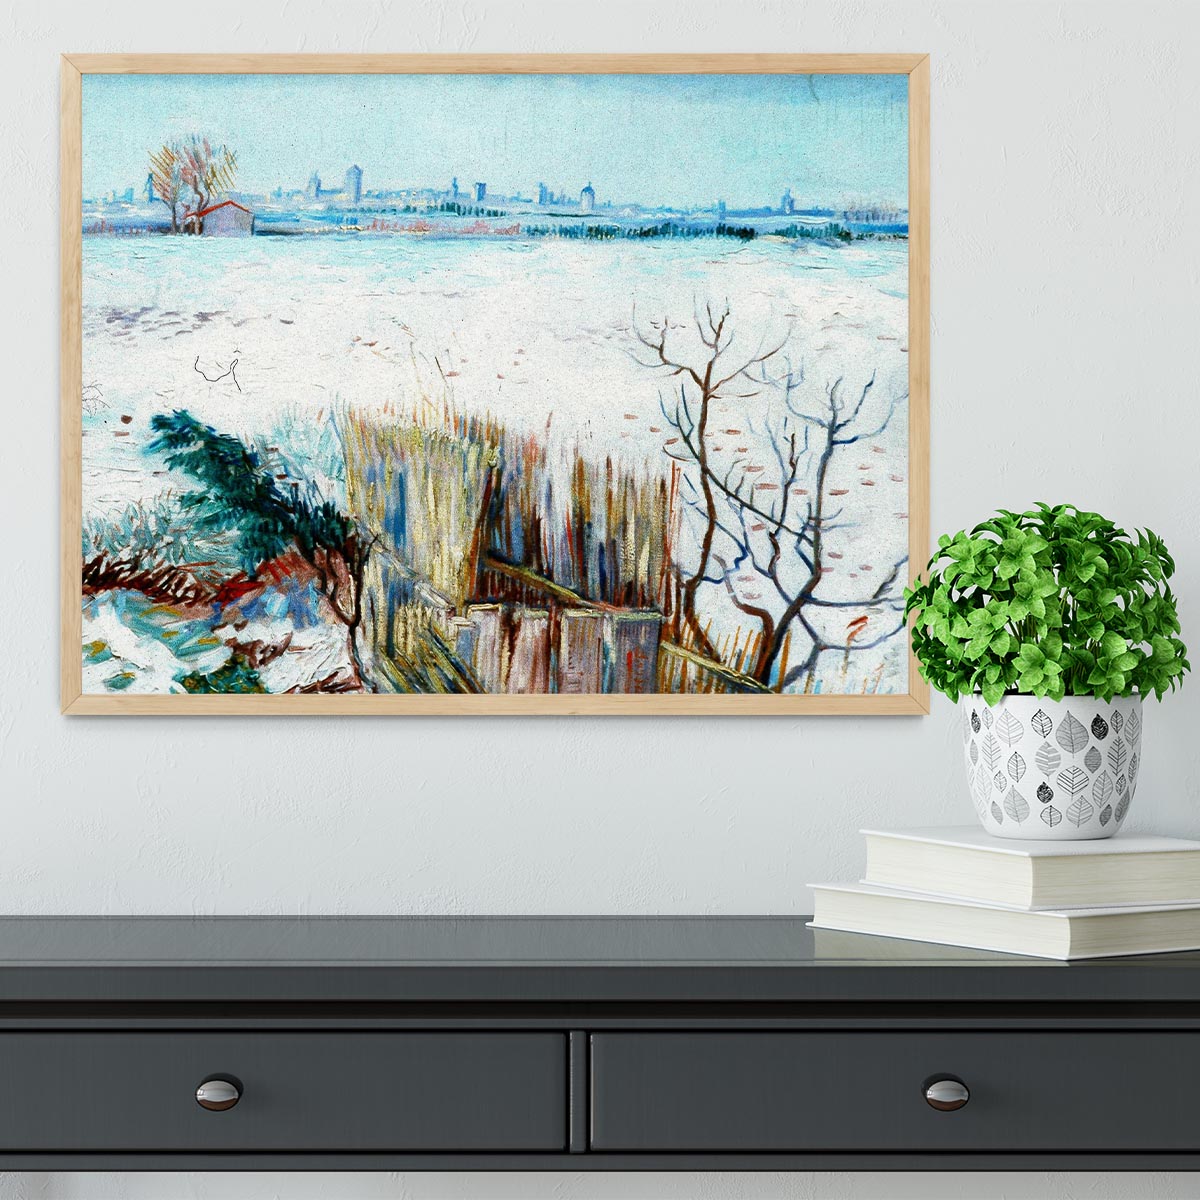 Snowy Landscape with Arles in the Background by Van Gogh Framed Print - Canvas Art Rocks - 4